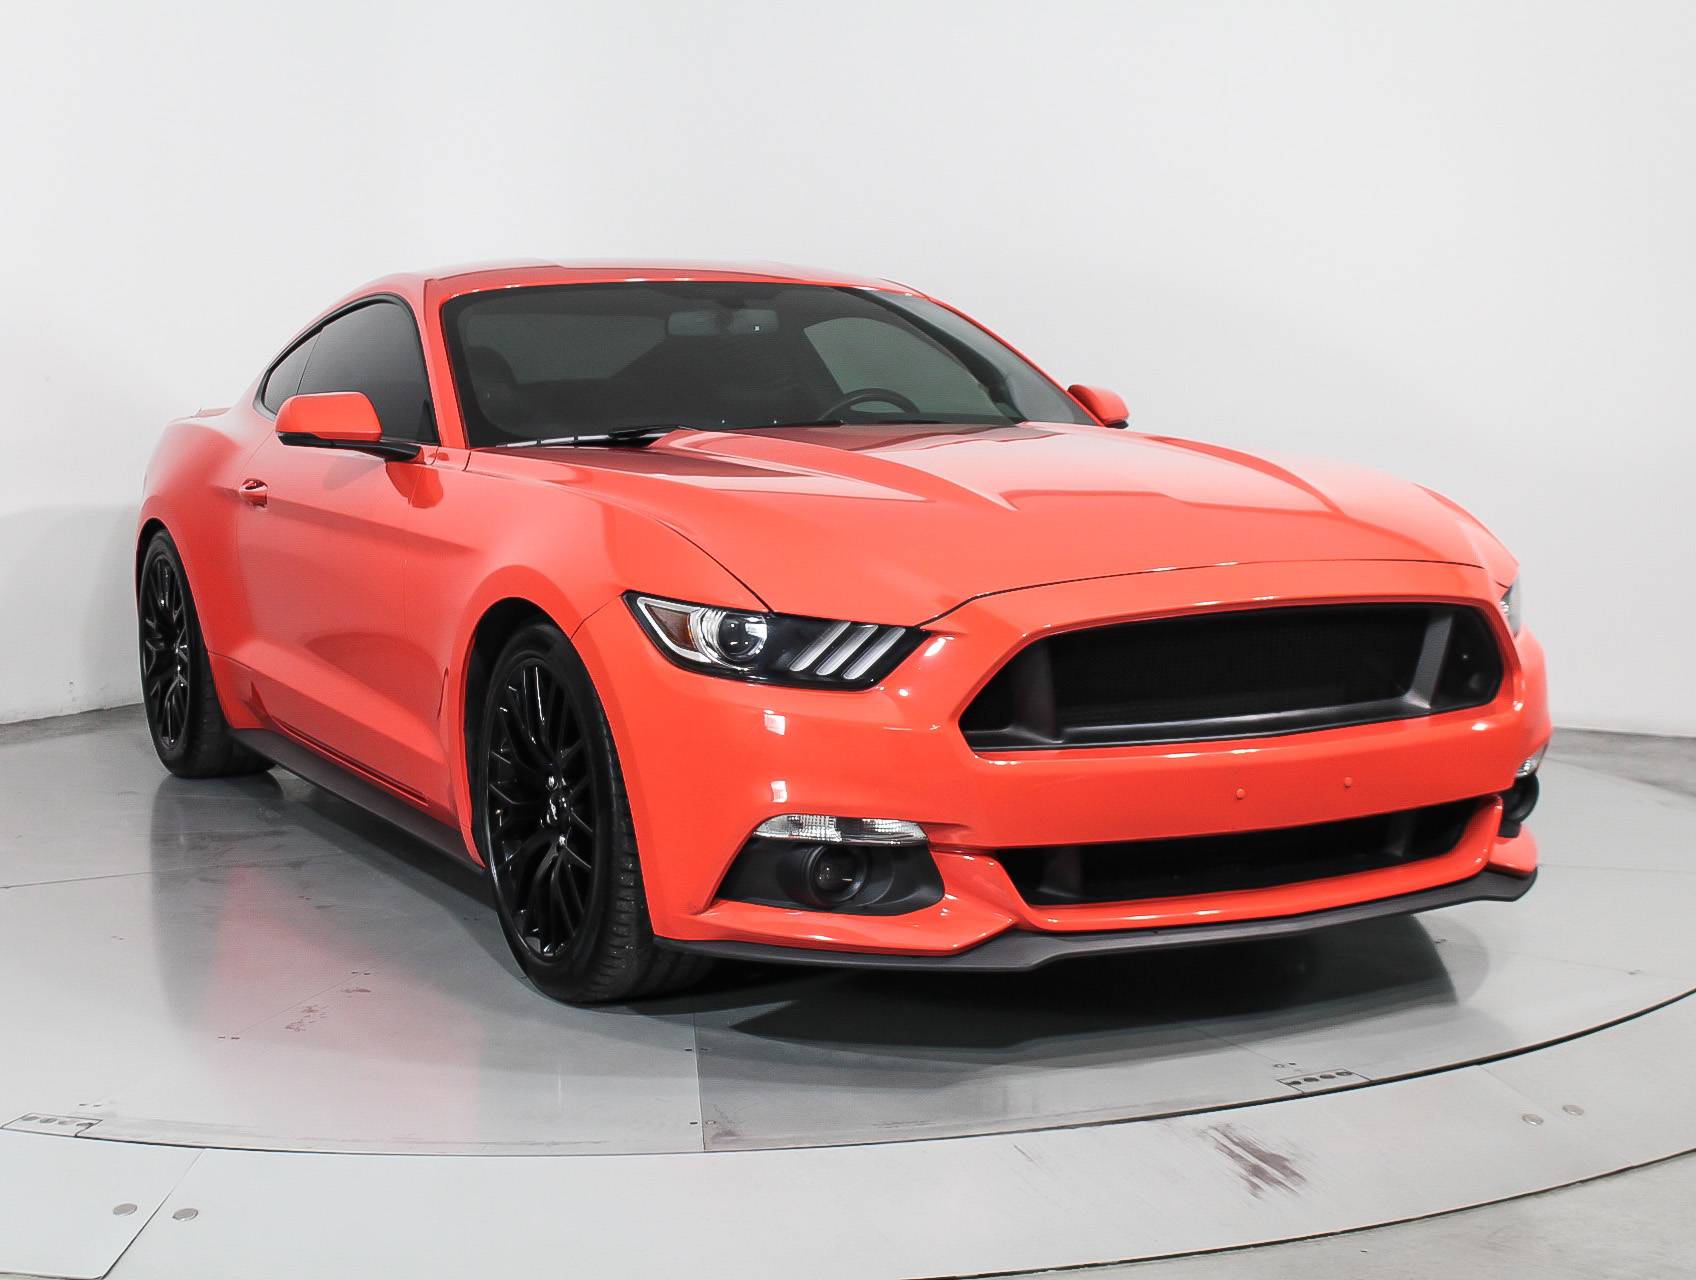 Florida Fine Cars - Used FORD MUSTANG 2016 MIAMI Ecoboost Premium